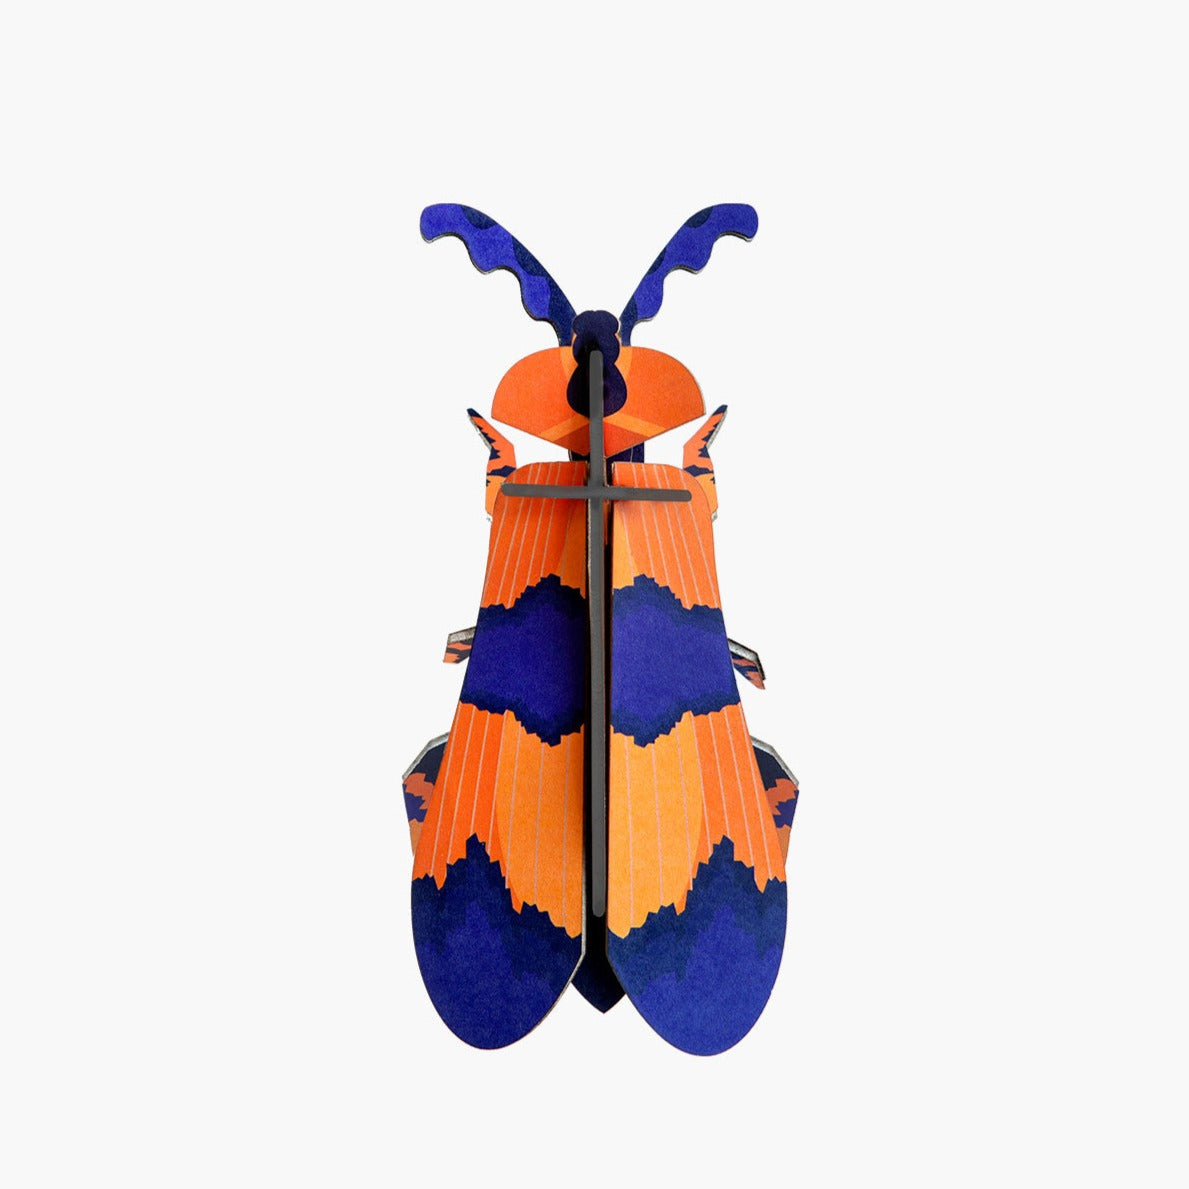 Winged Beetle-Little Fish Co.